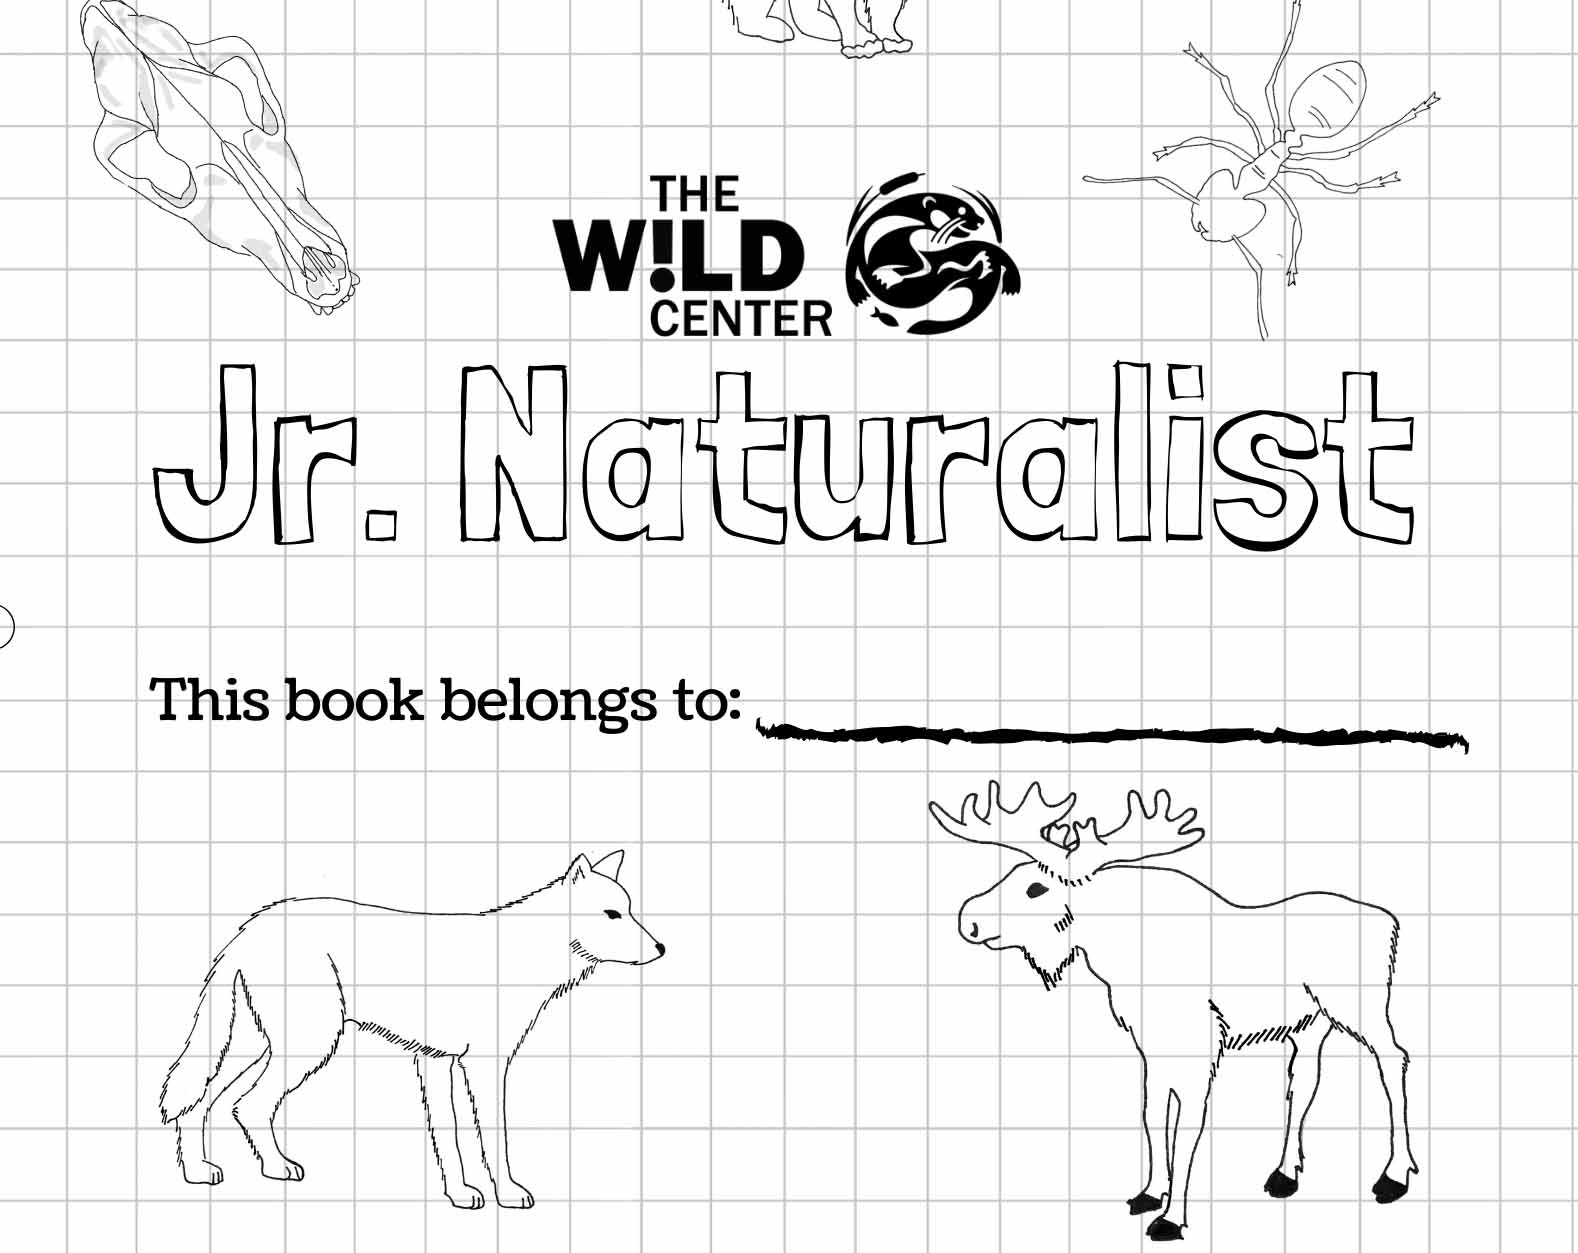 Jr. Naturalist book cover featuring illustrations of wolf, moose, skull and ant